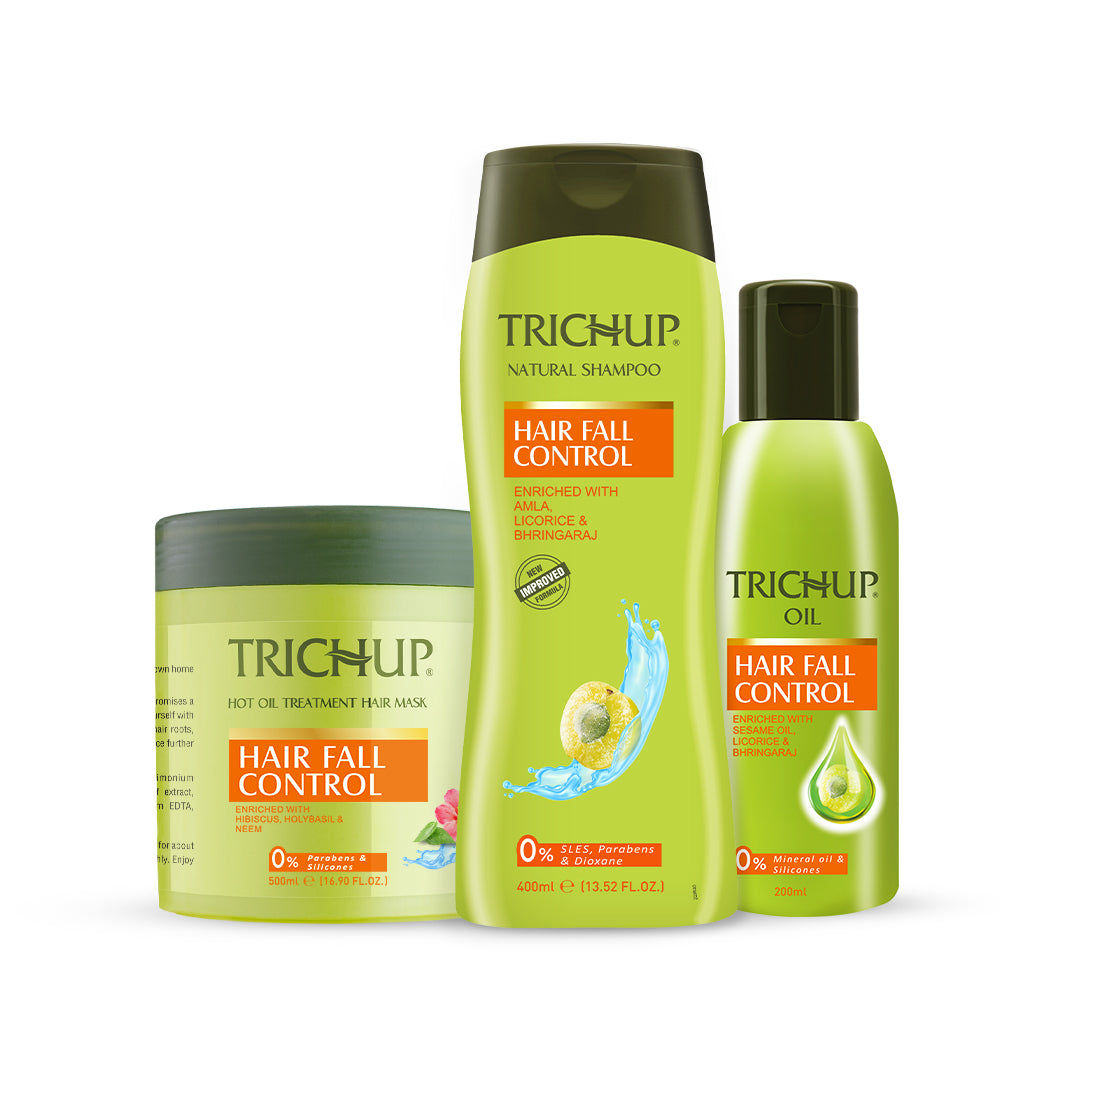 Trichup Hair Fall Control Kit - Enriched with Amla, Bhringraj & Licorice - Helps to Reduce Hair Fall, Strengthens Your Hair follicles & Improves Hair Texture - VasuStore